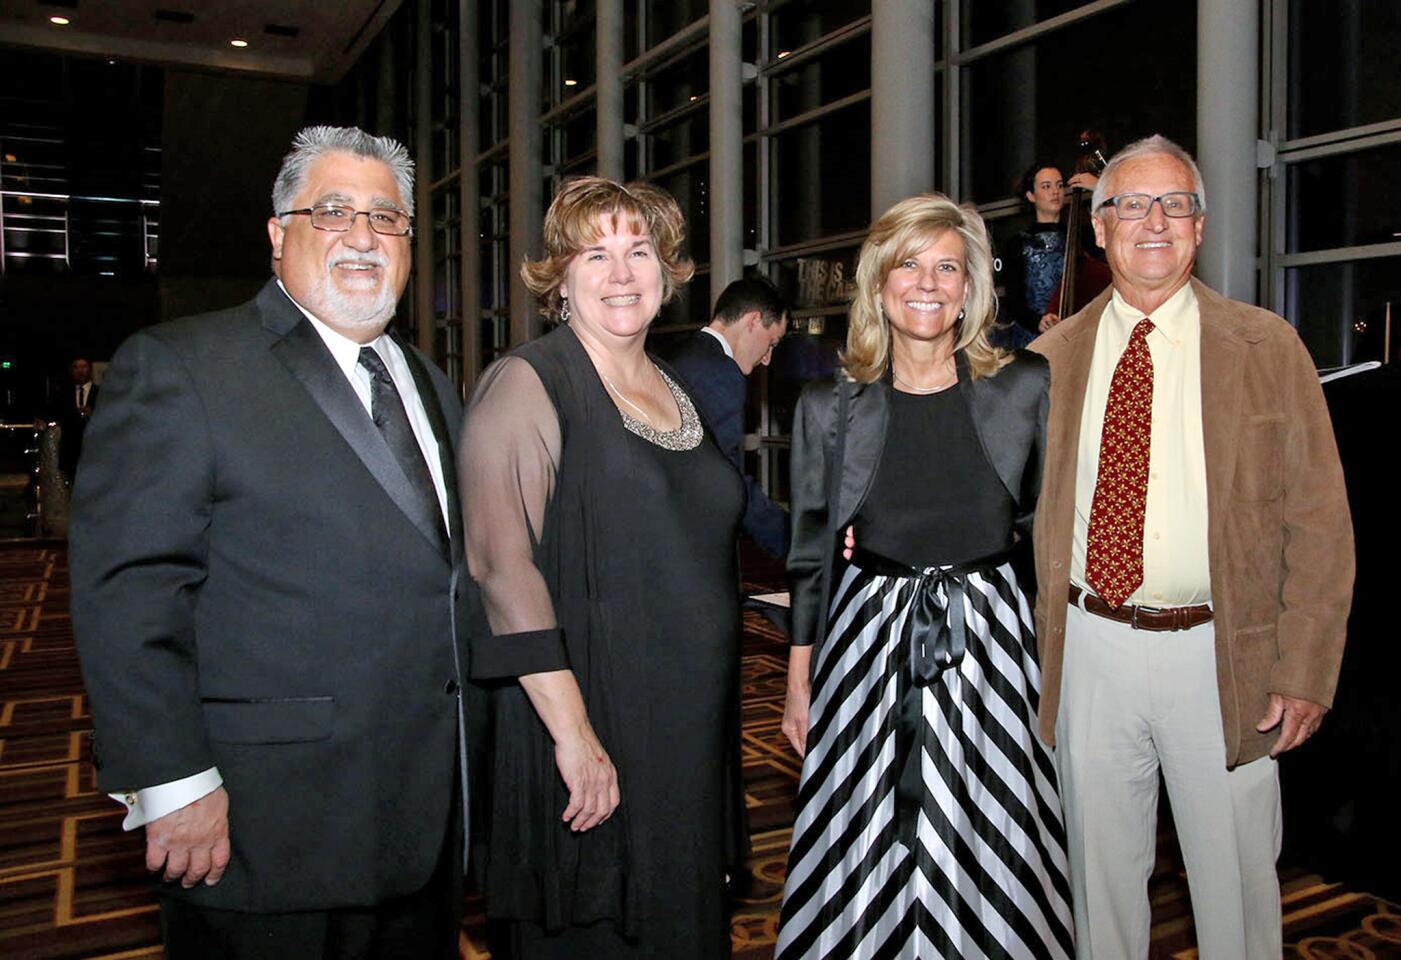 State Sen. Anthony Portantino is joined by his wife Ellen and Supt. Wendy Sinnette with her husband Rick at the La Cañada Flintridge Educational Foundation's 27th annual Spring Gala.